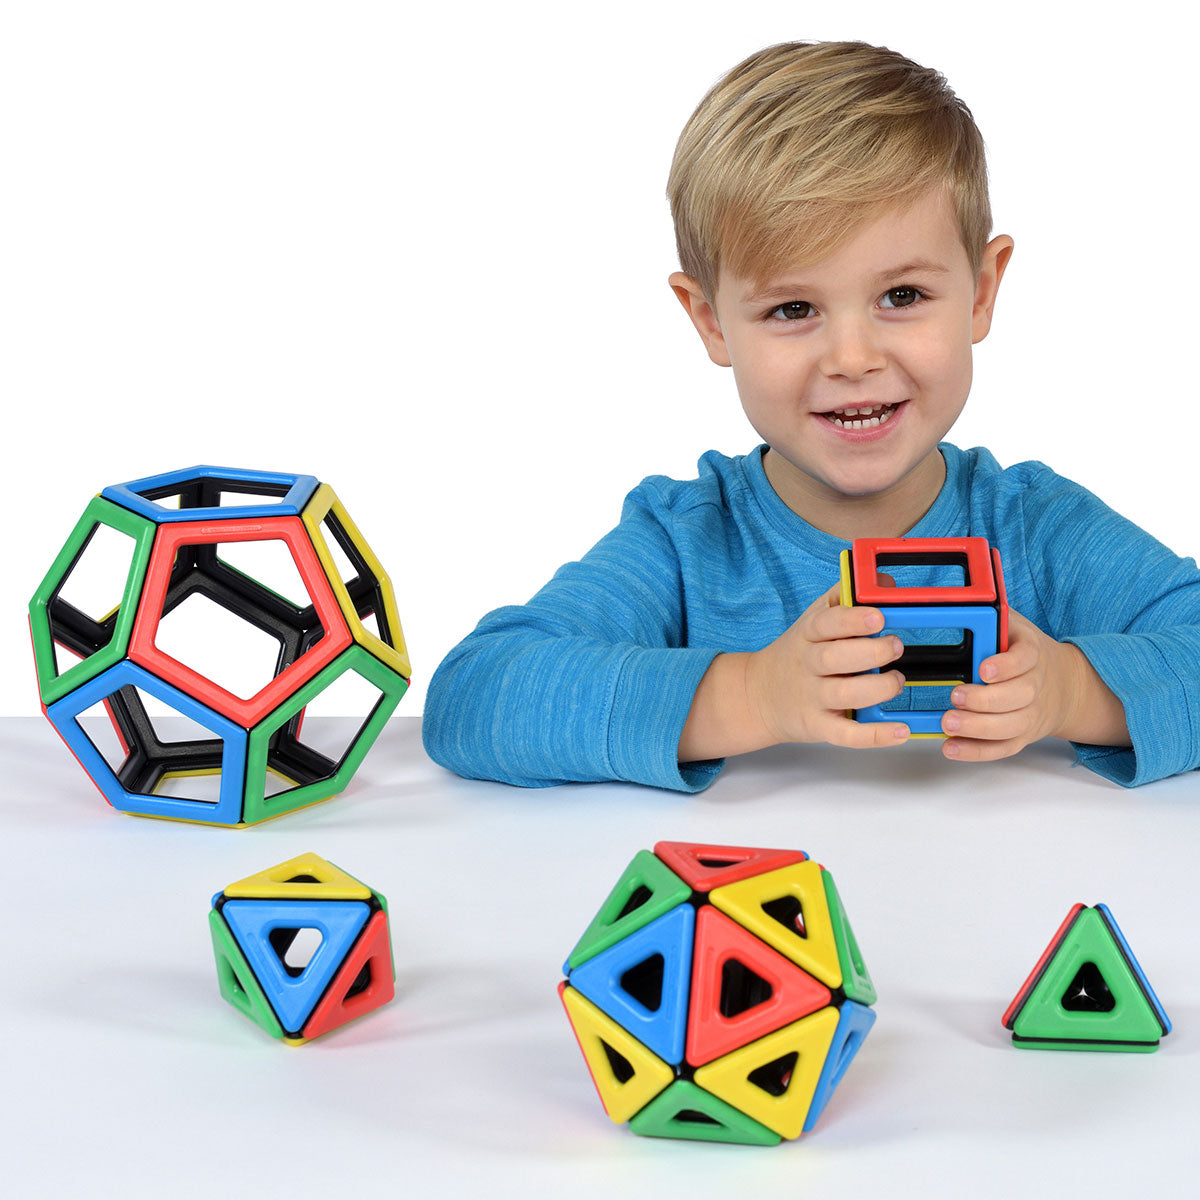 Magnetic Polydron Platonic Solids Set, Get ready to delve into the fascinating world of geometry with the Magnetic Polydron Platonic Solids Set. Designed for both young and older children, this versatile set allows students to investigate and construct the famous five platonic solids.With 50 pieces in total, including 6 squares, 32 equilateral triangles, and 12 pentagons, this set provides endless opportunities for building and exploration. Young learners can begin by creating basic shapes and gradually pro